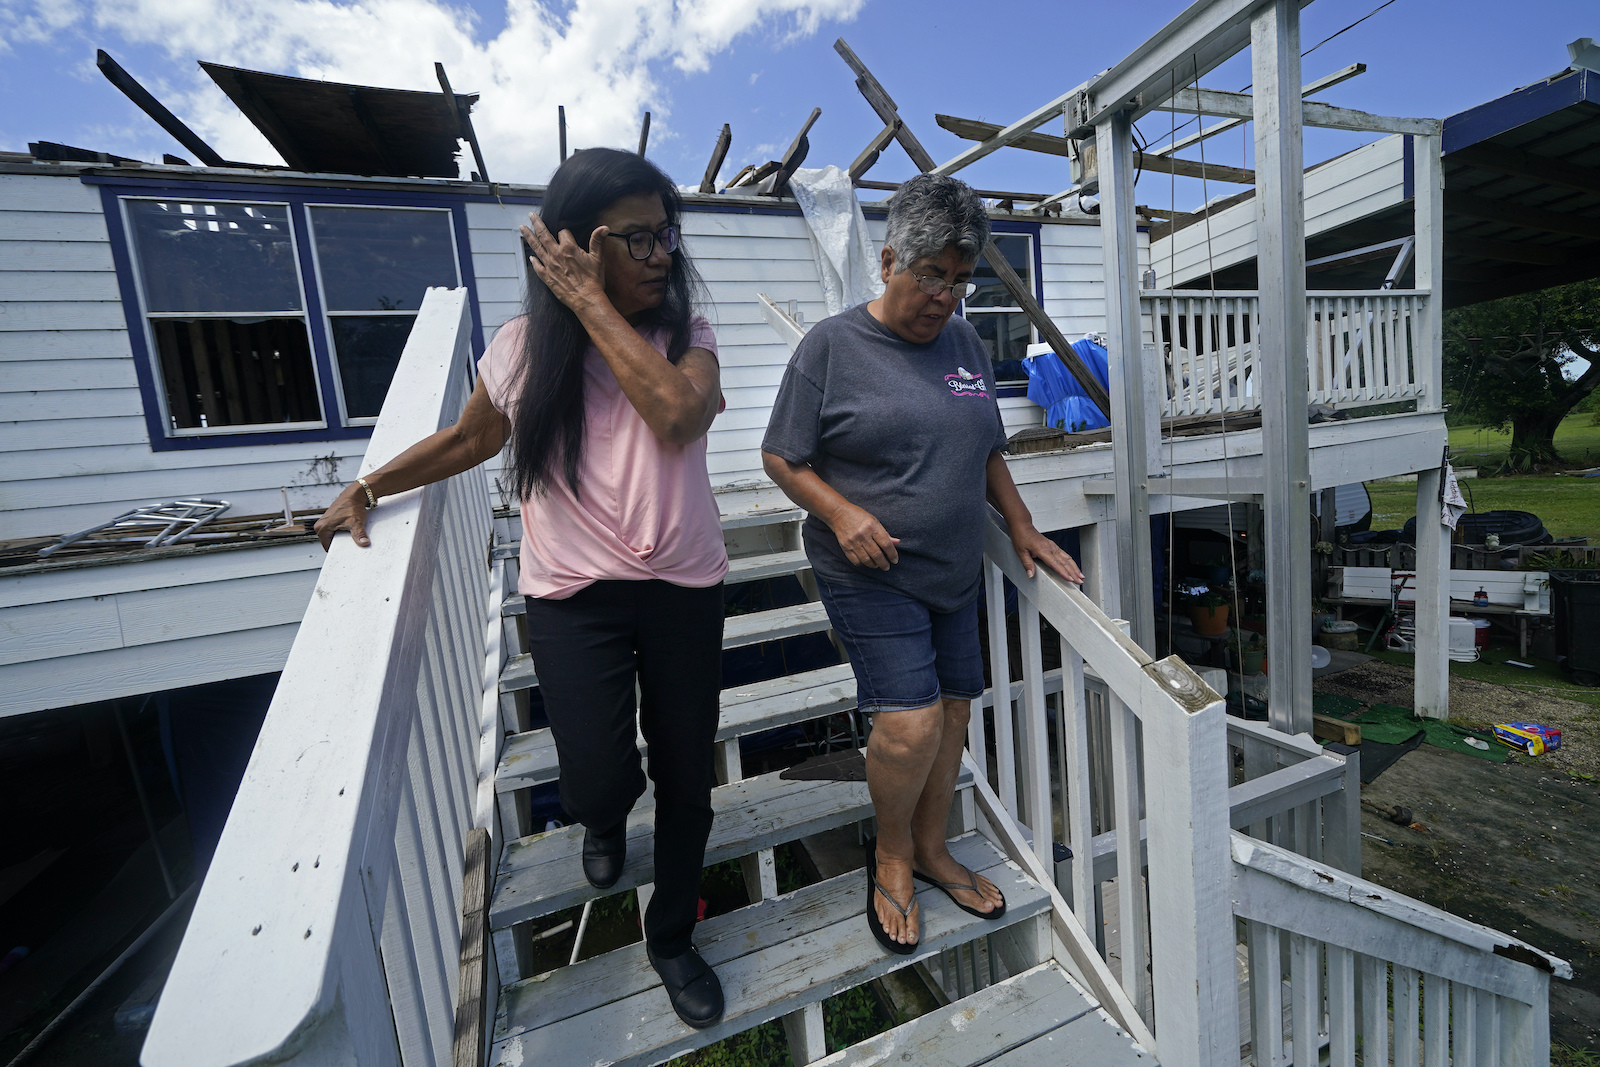 two women walk down steps connected to damaged home